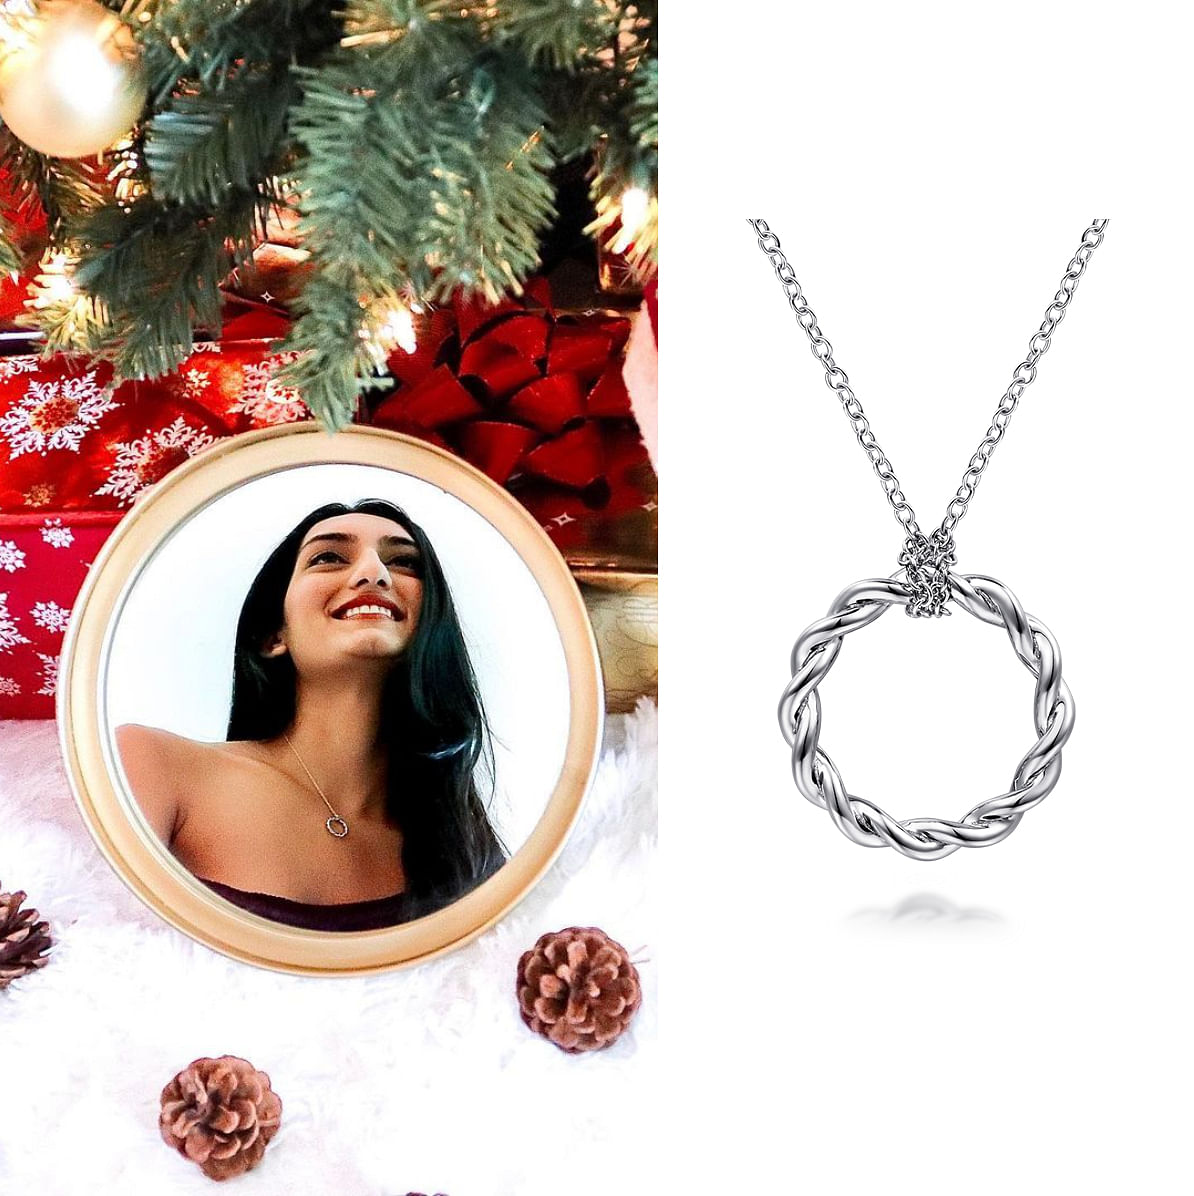 January 2020 Influencer Divya Patel tagging Gabriel & Co. and featuring the Stronger Together Necklace. Love this stunning shot and mention of how it would make a great gift this season. 